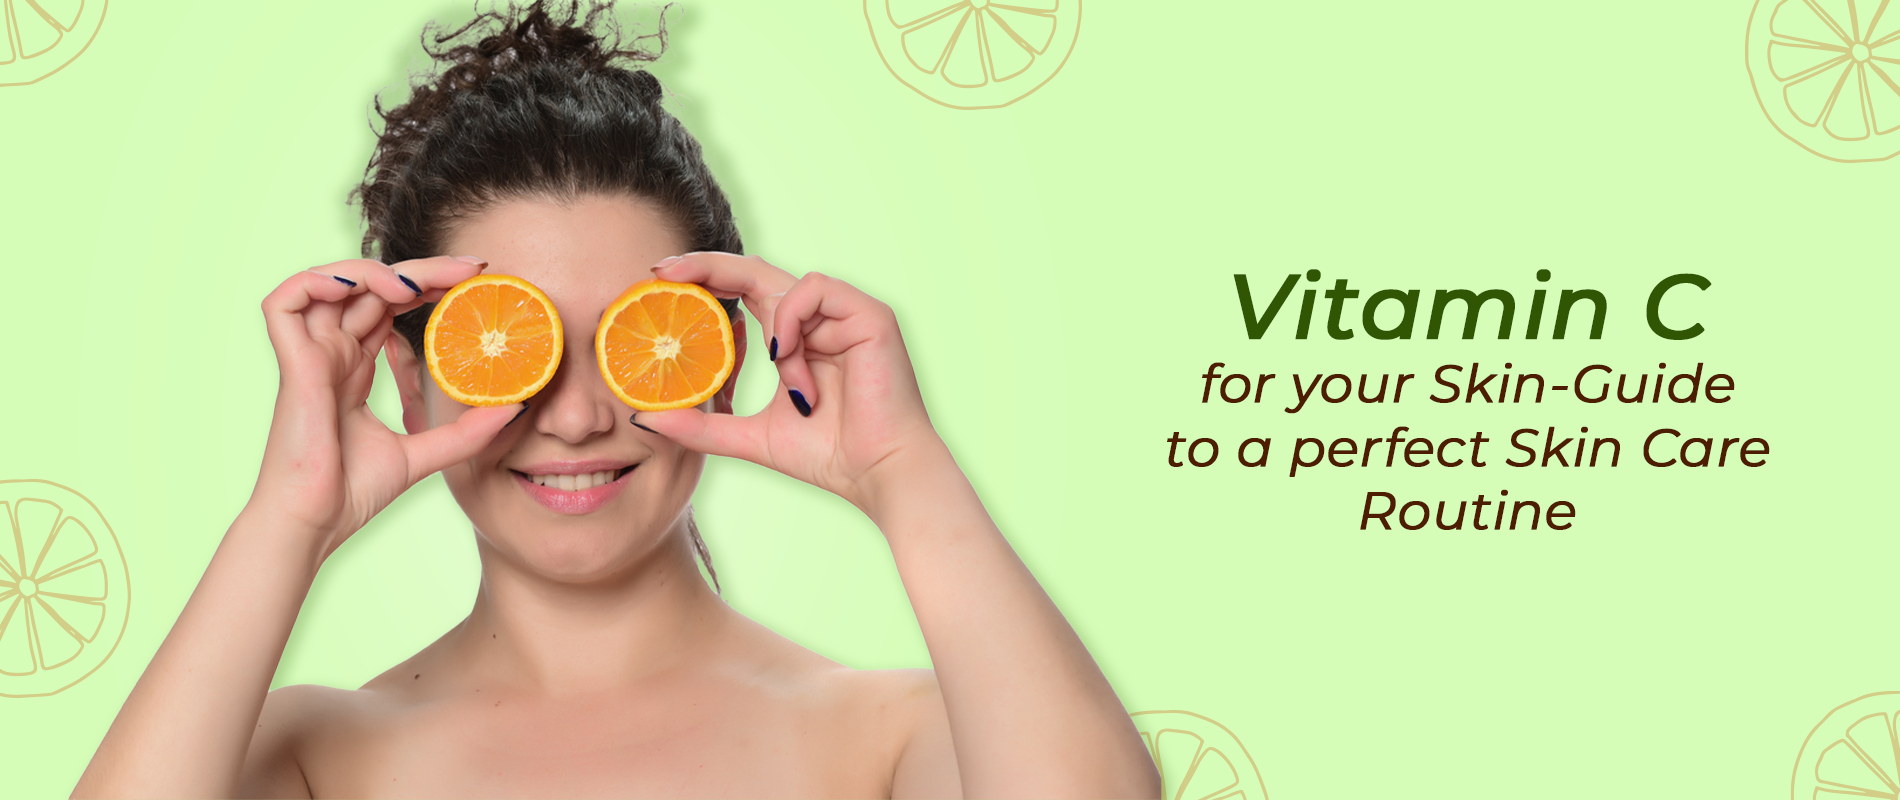 Vitamin C for your Skin- Guide to a Perfect Skin Care Routine